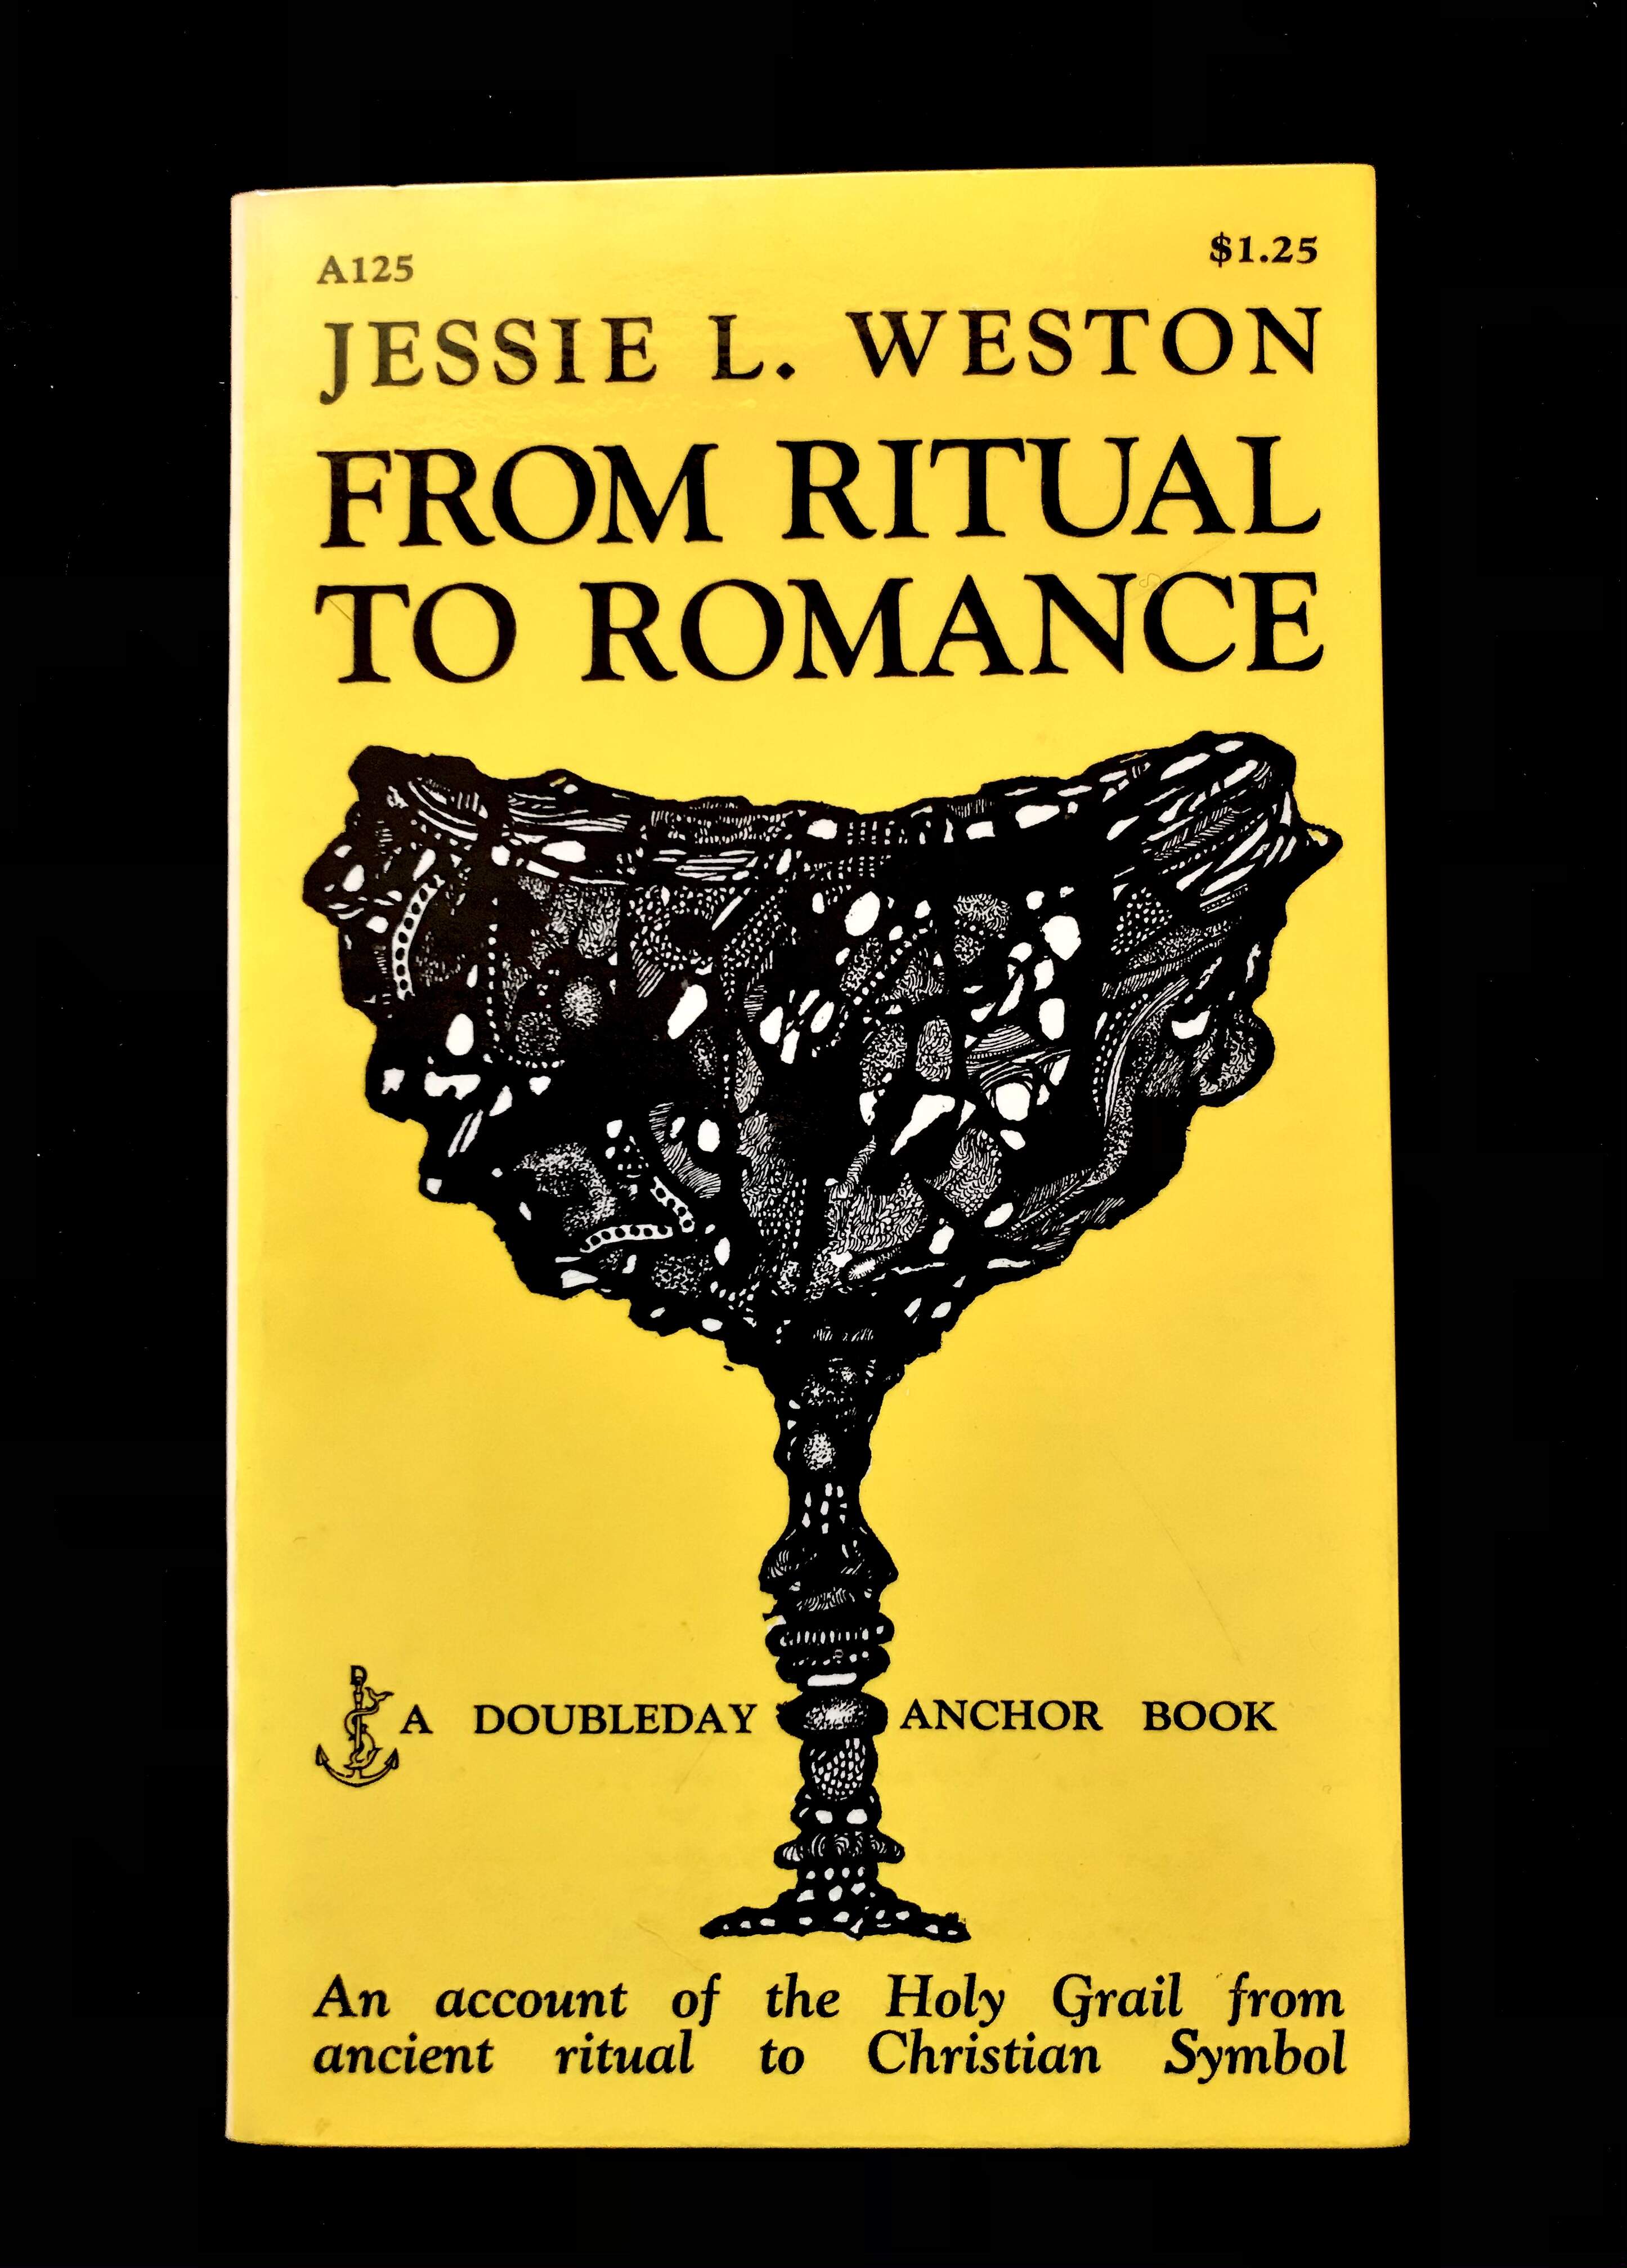 From Ritual to Romance by Jessie L. Weston